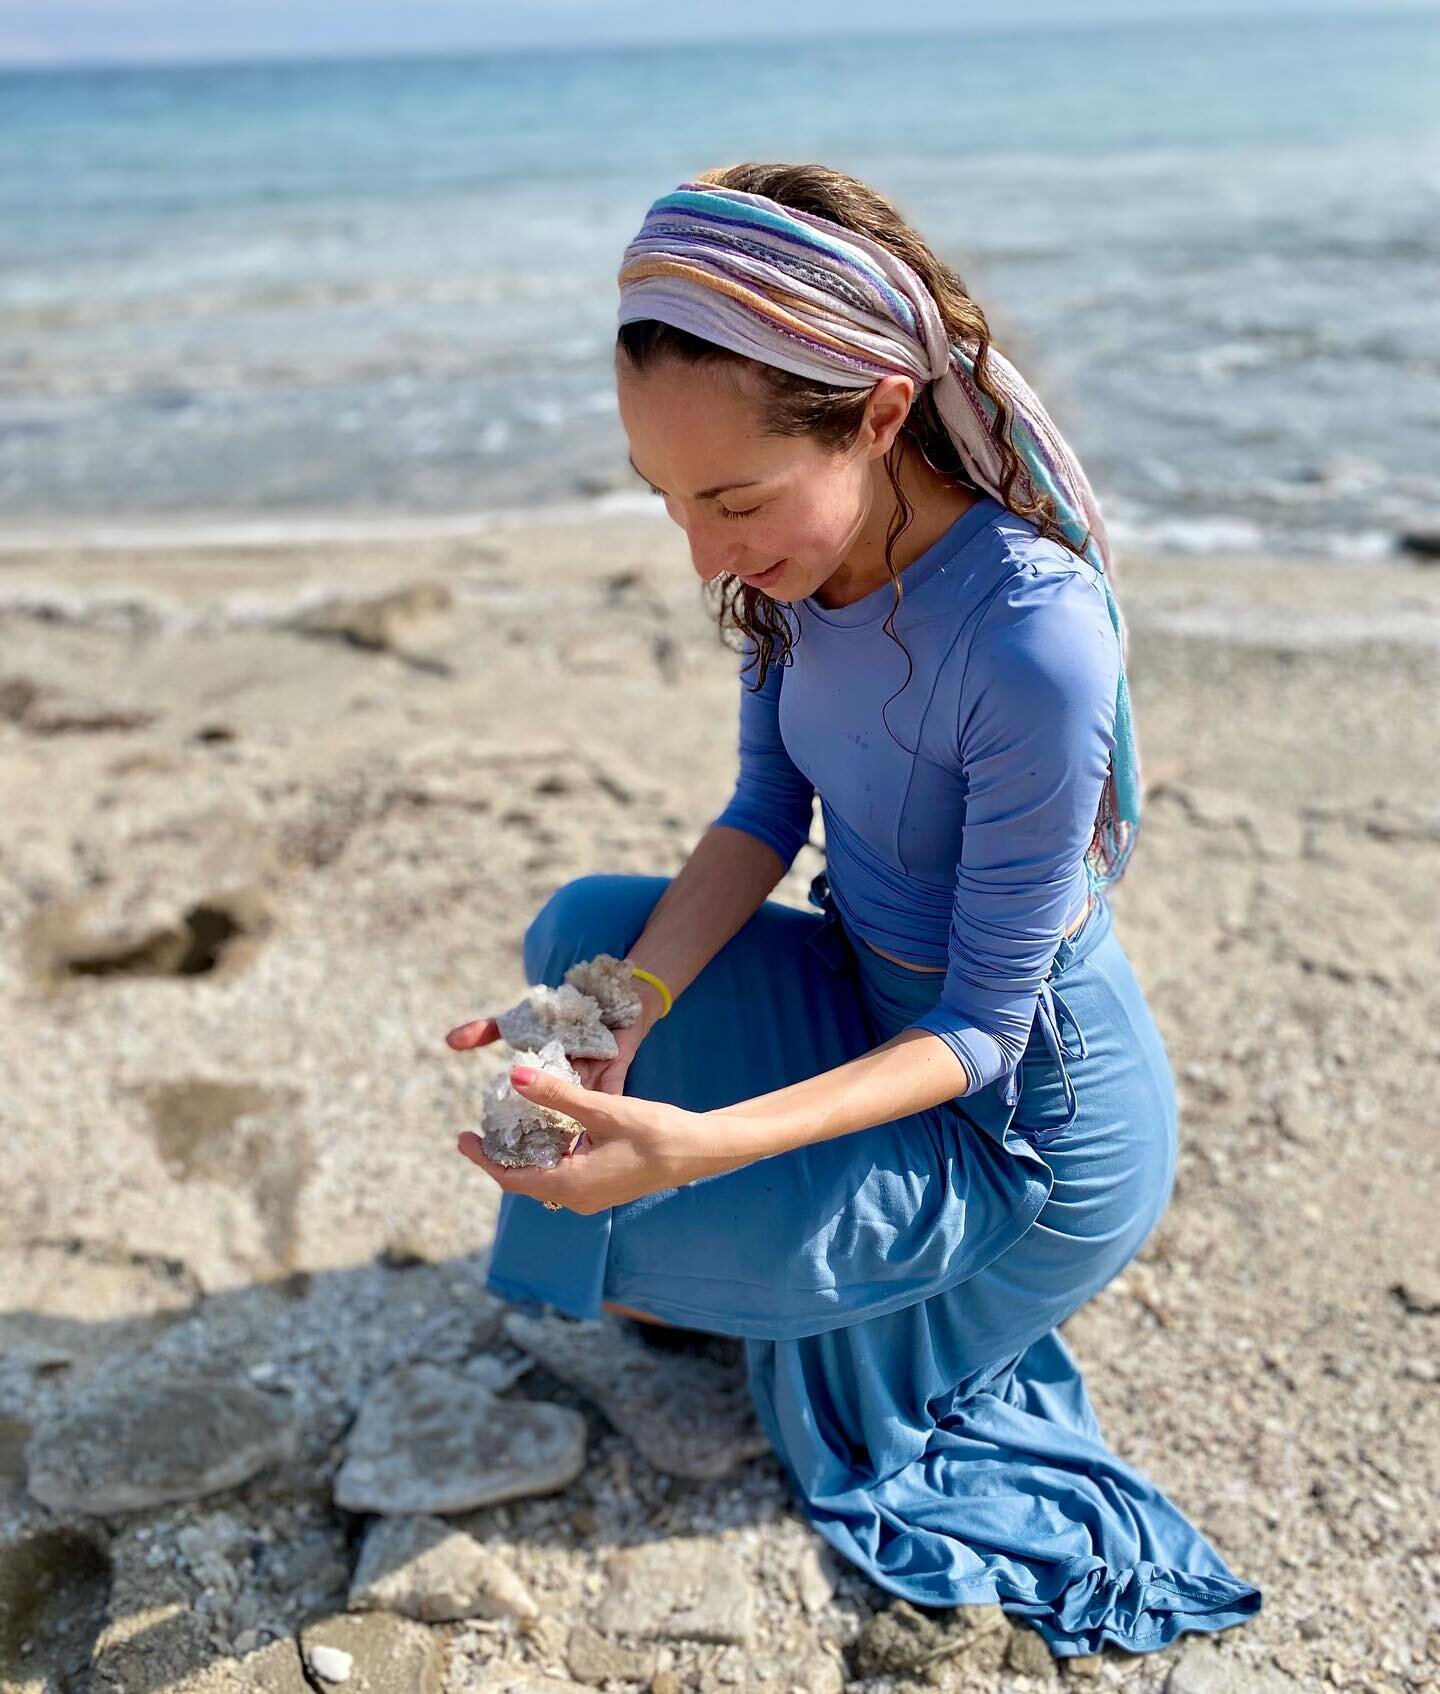 This is me harvesting Dead Sea salt crystals to bring home, to remember this teaching : Cheshvan is the month of Nefilah/falling. Many people this month may be experiencing an emotional &ldquo;descent&rdquo; , with feelings of loneliness, confusion, 